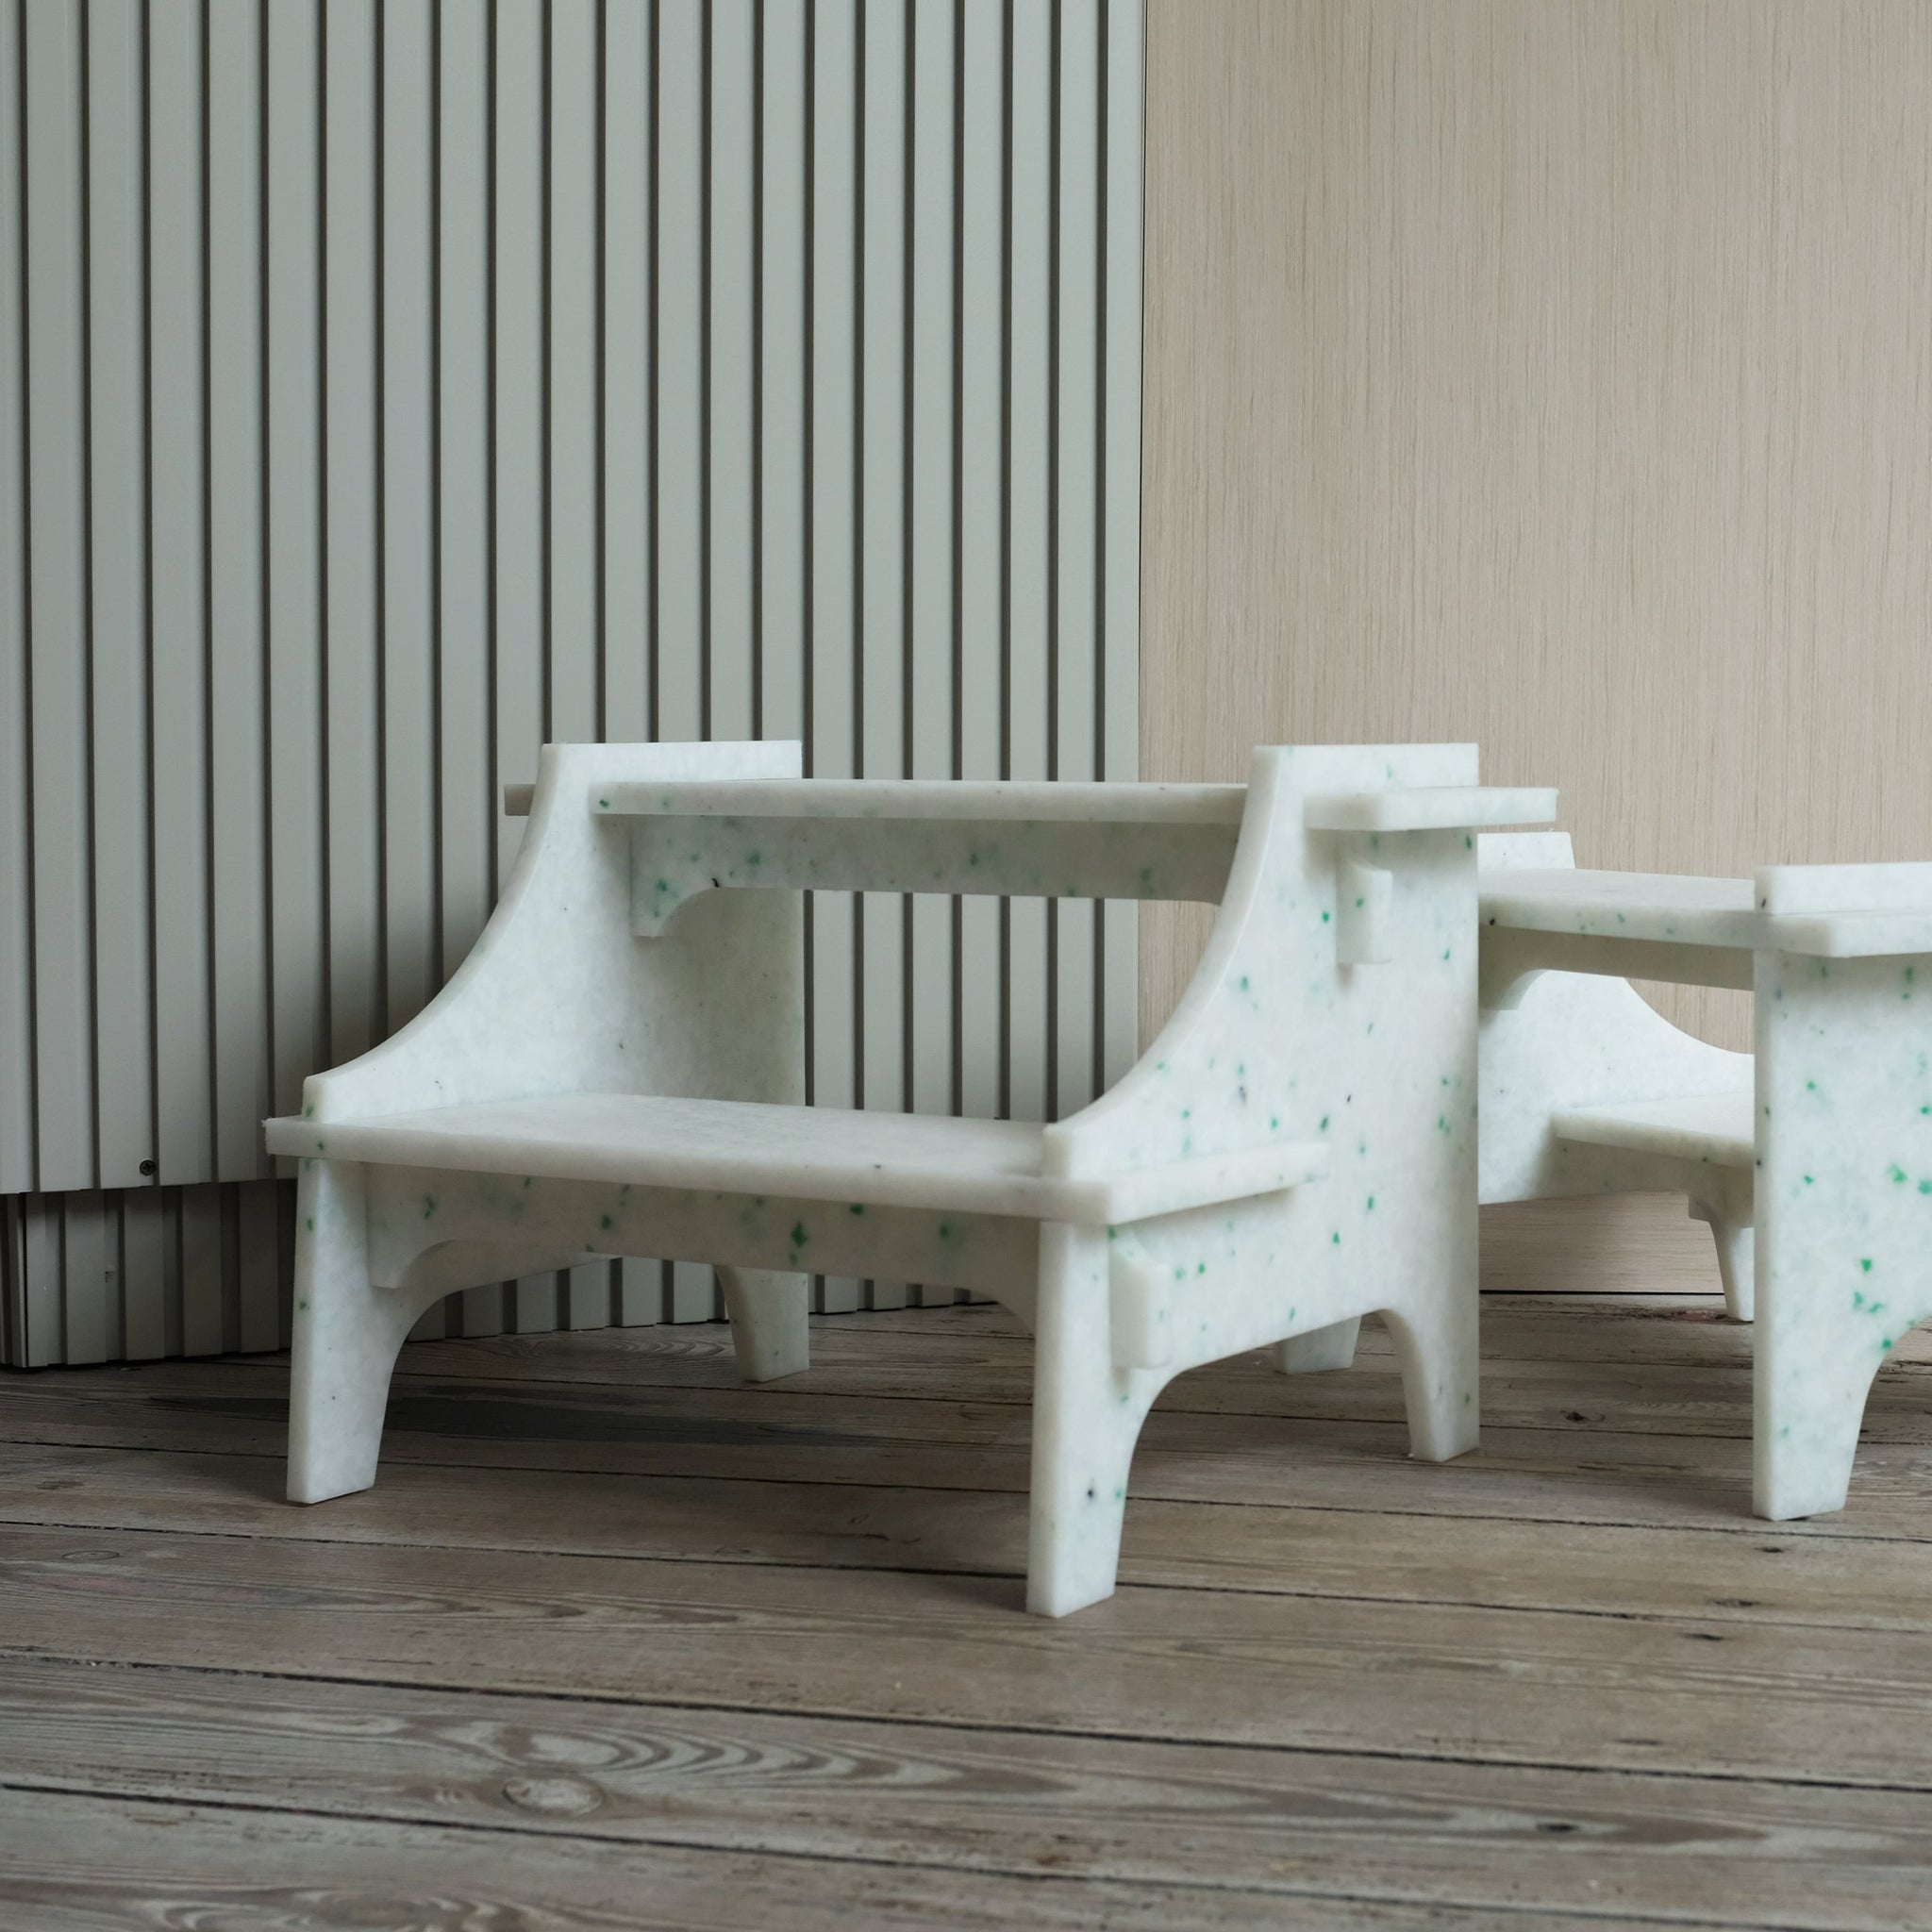 TWO DIFFERENT WHITE STEP STOOLS BY THE MINIMONO PROJECT - BRAND FOR ECO FRIENDLY - PLAYFUL - MULTI FUNCTIONAL - SUSTAINABLE - HIGH QUALITY - DESIGN FURNITURE FROM RECYCLED PLASTIC FOR BOTH ADULT AND CHILDREN MADE IN BERLIN GERMANY